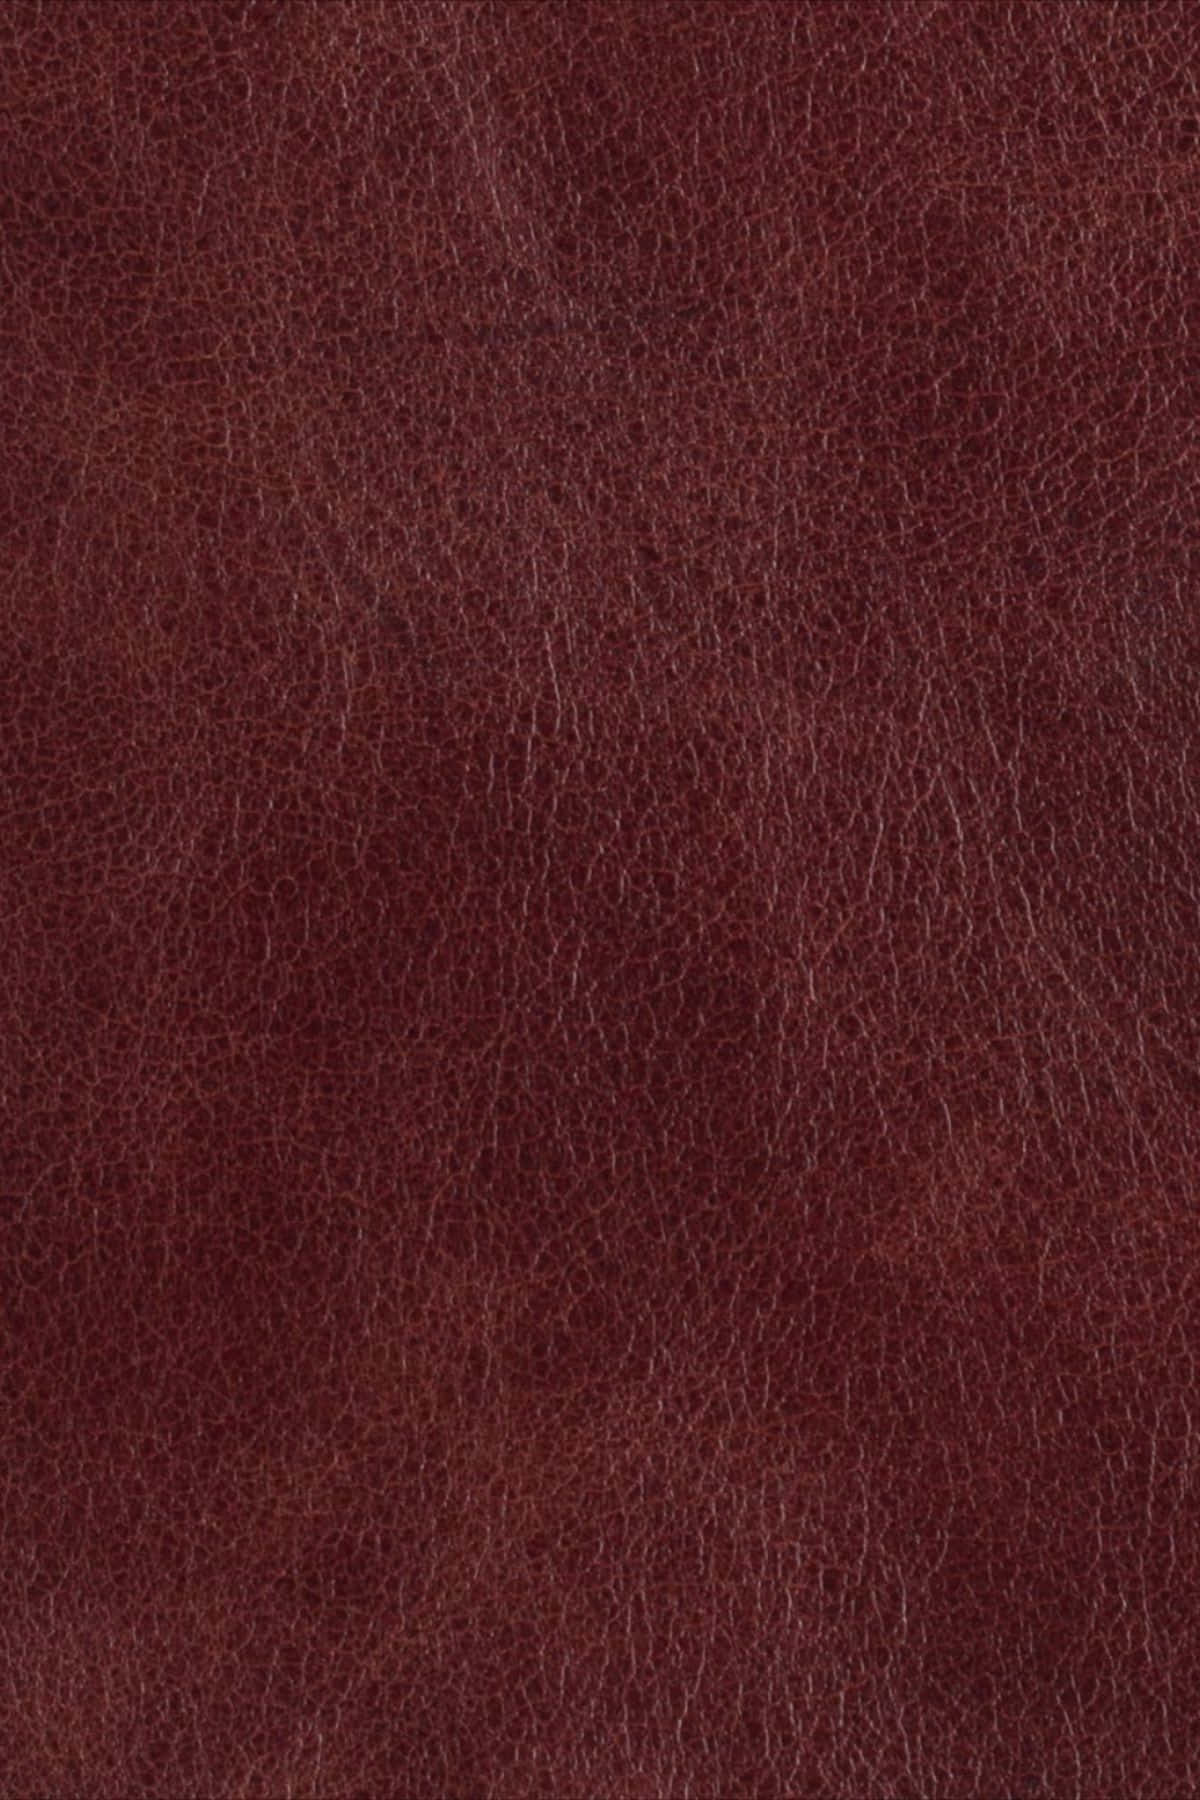 Red Brown Leather Texture Picture